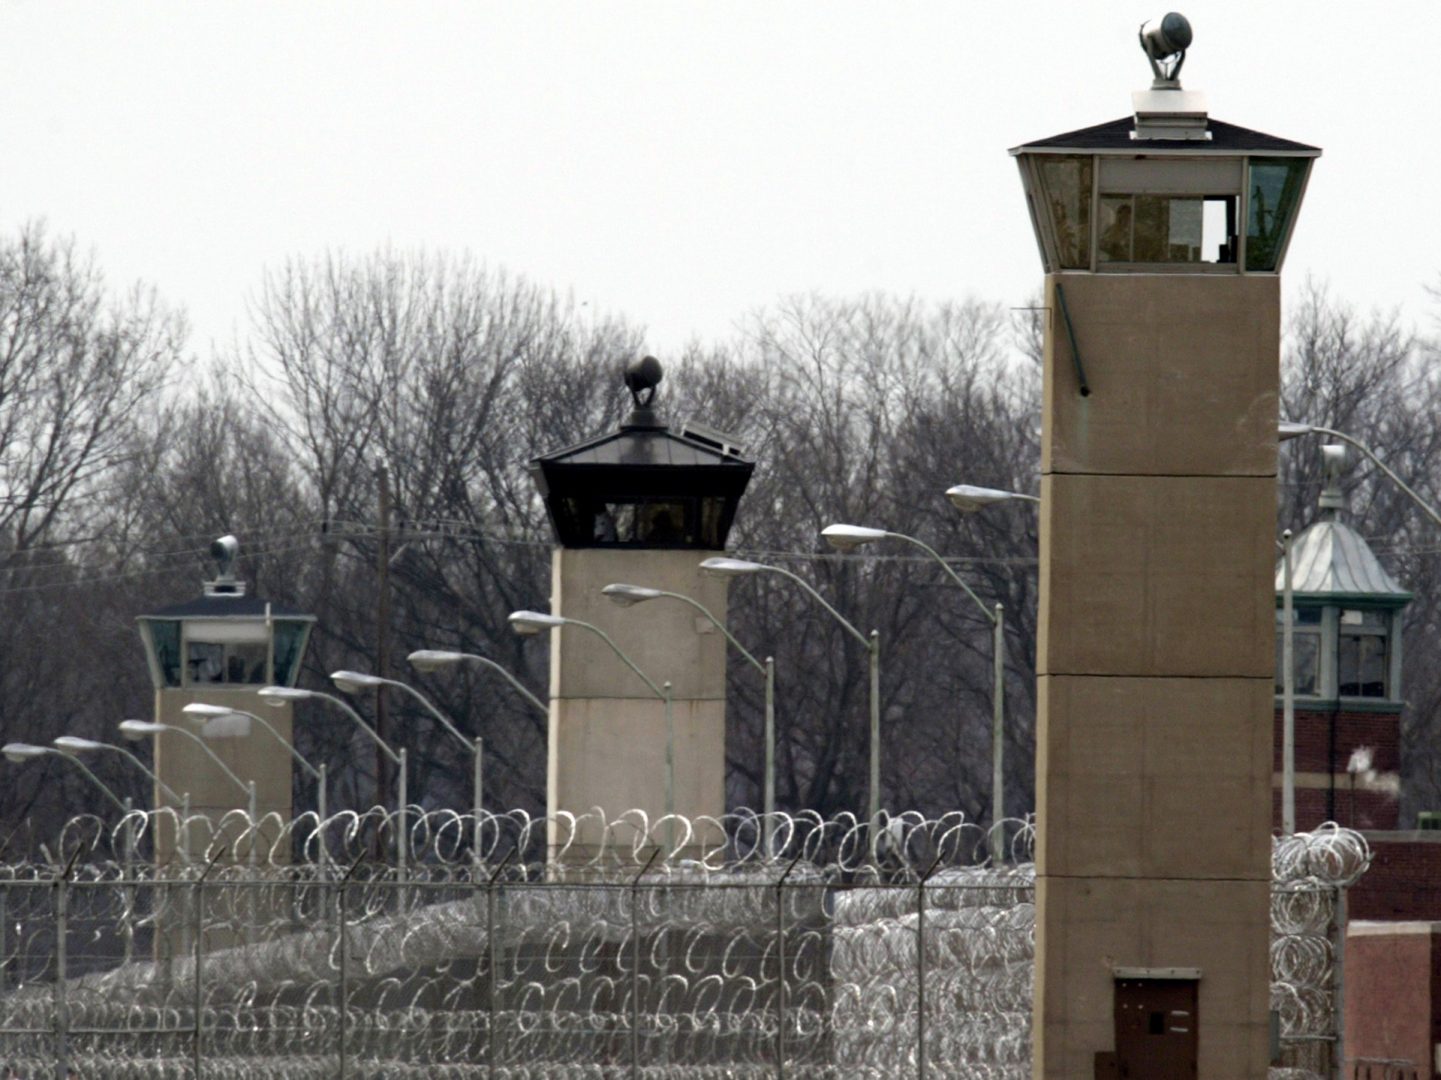 Three executions are scheduled this week at the U.S. penitentiary in Terre Haute, Ind., but legal challenges make it unclear when -- or if -- they'll go forward.